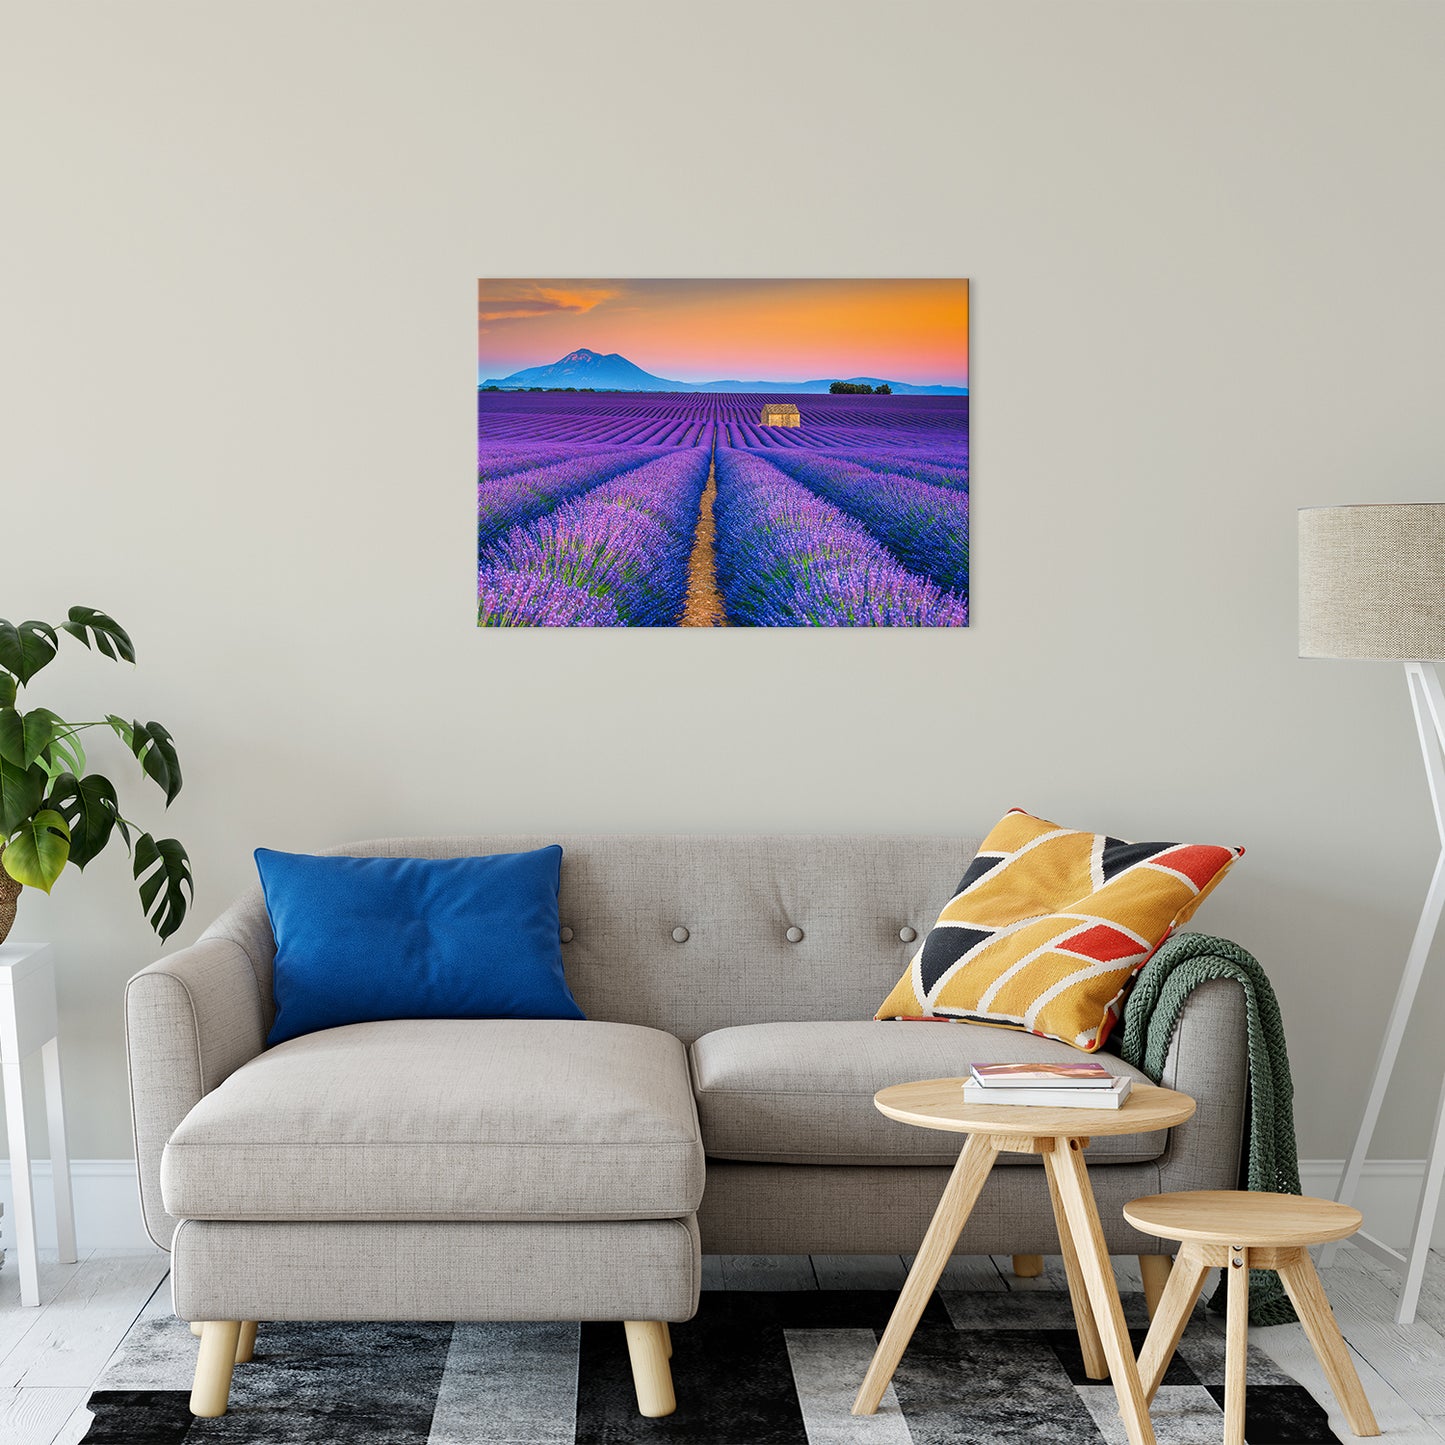 Blooming Lavender Field and Sunset Floral Landscape Fine Art Canvas Wall Art Prints 24" x 36" - PIPAFINEART